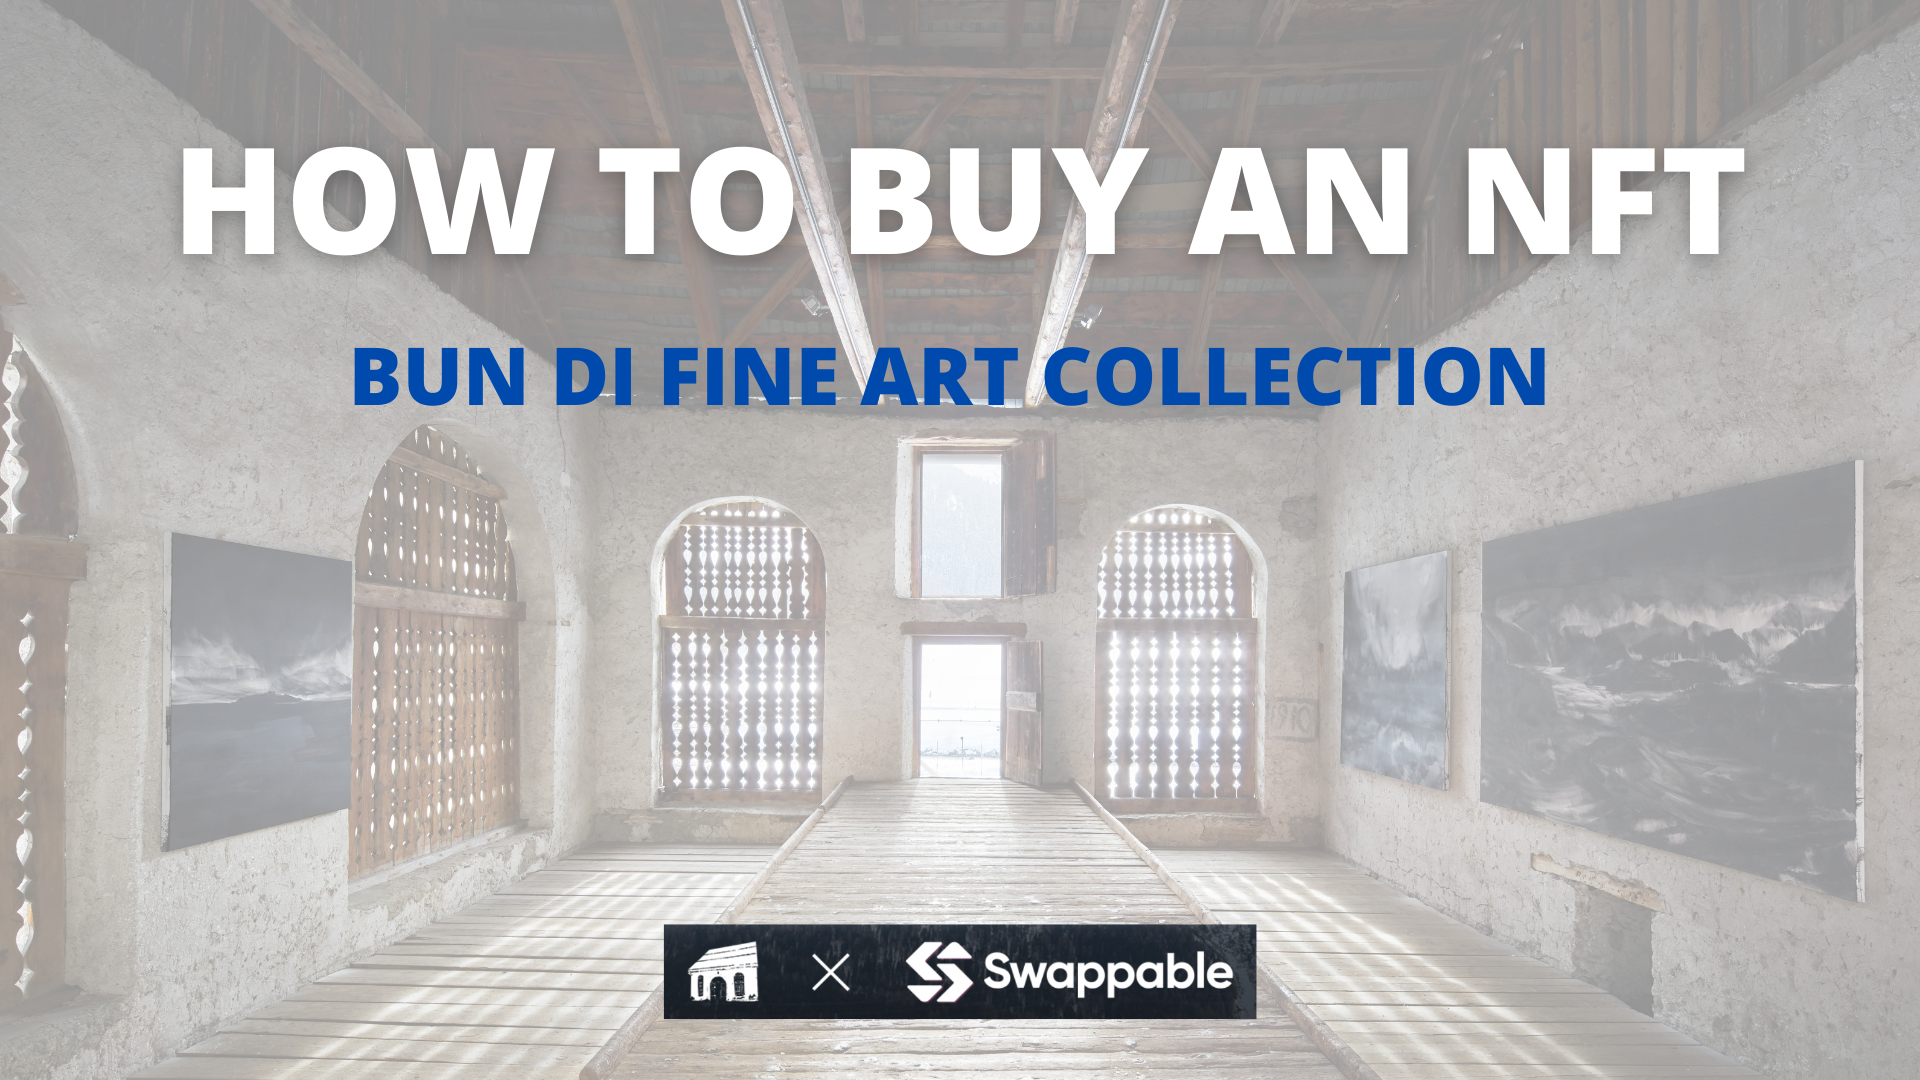 How To Purchase An NFT From The ‘Bun Di NFT’ Collection